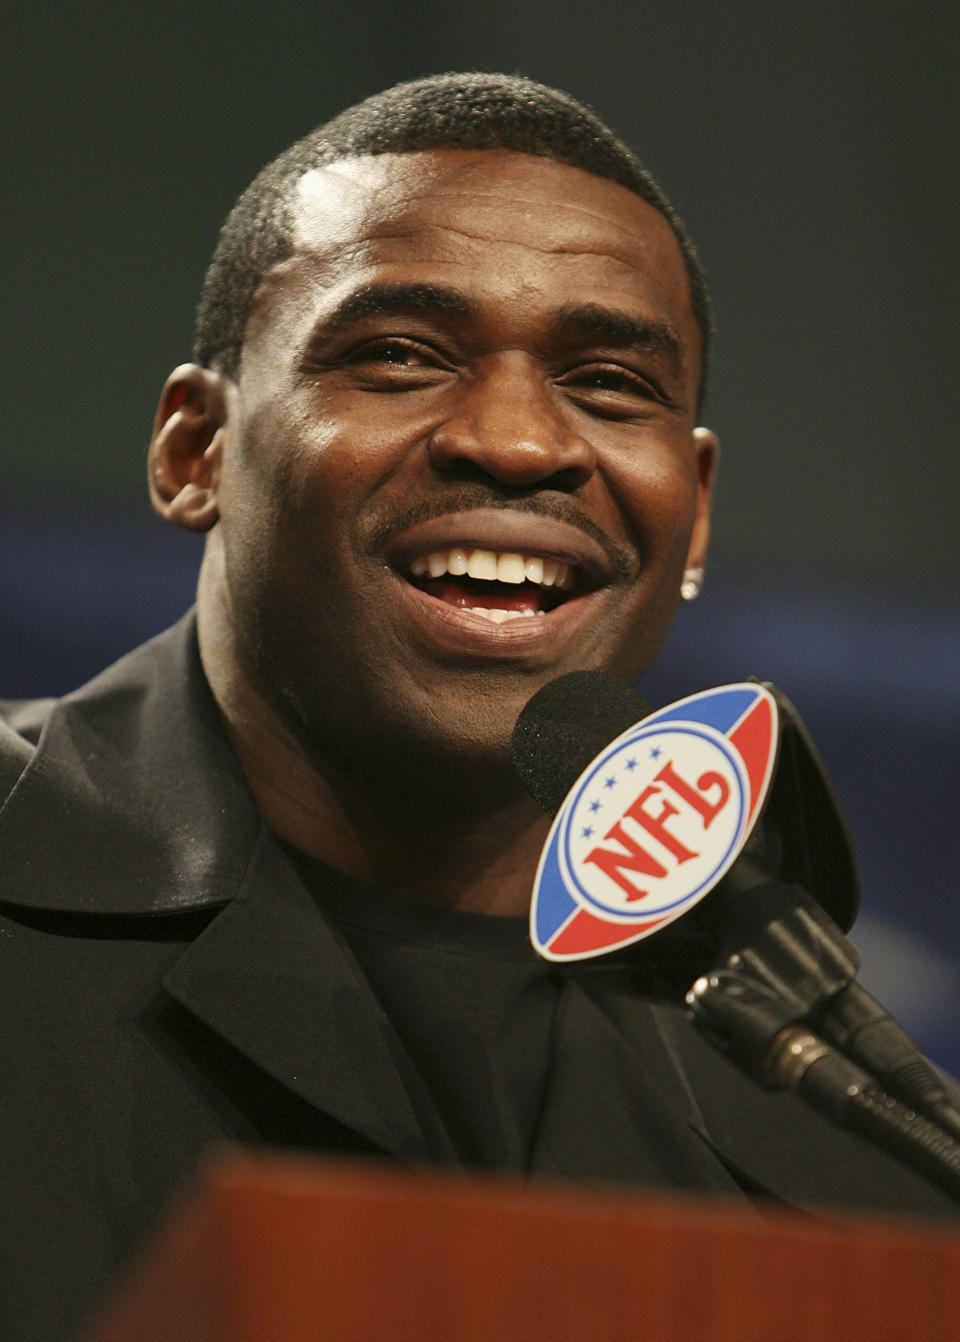 Michael Irvin, former Dallas Cowboy and NFL Hall of Famer, appeared on <a href="http://www.huffingtonpost.com/2011/07/12/michael-irvin-out-magazine-cover_n_896468.html">Out magazine’s cover</a> last July. Irvin spoke out for LGBT rights and marriage equality, citing his late gay brother’s passing. He also said he would <a href="http://www.out.com/entertainment/sports/2011/07/10/michael-irvin-playmaker-preaches">support any athlete</a> in the NFL, NBA, NHL or MLB who comes out.  